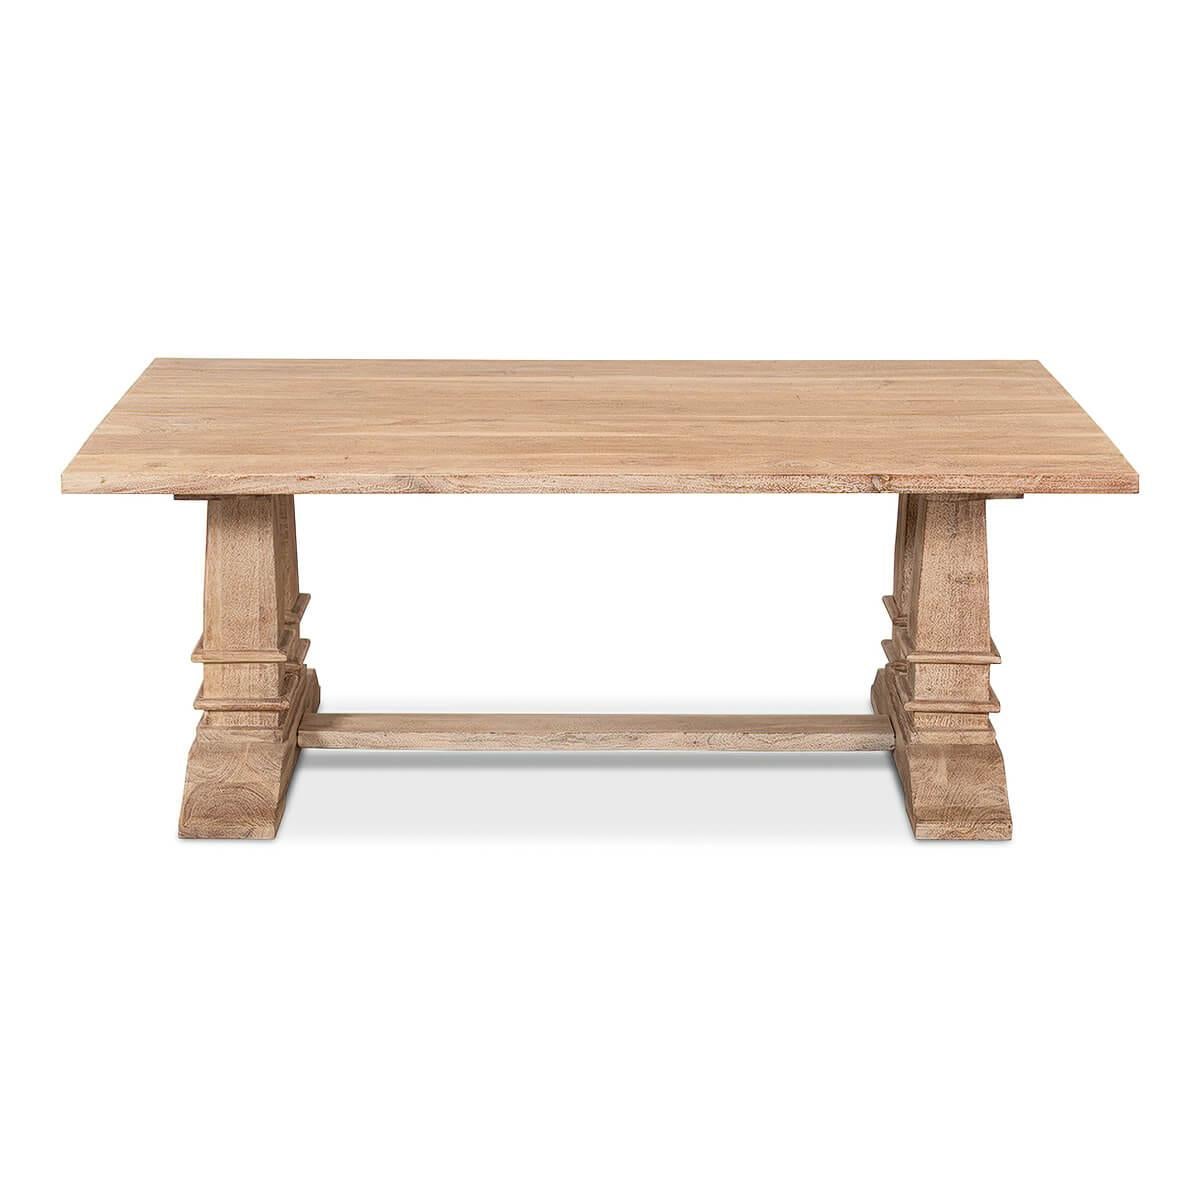 Classic natural rustic farmhouse coffee table with double square column form trestle ends with a stretcher. 

Dimensions: 53